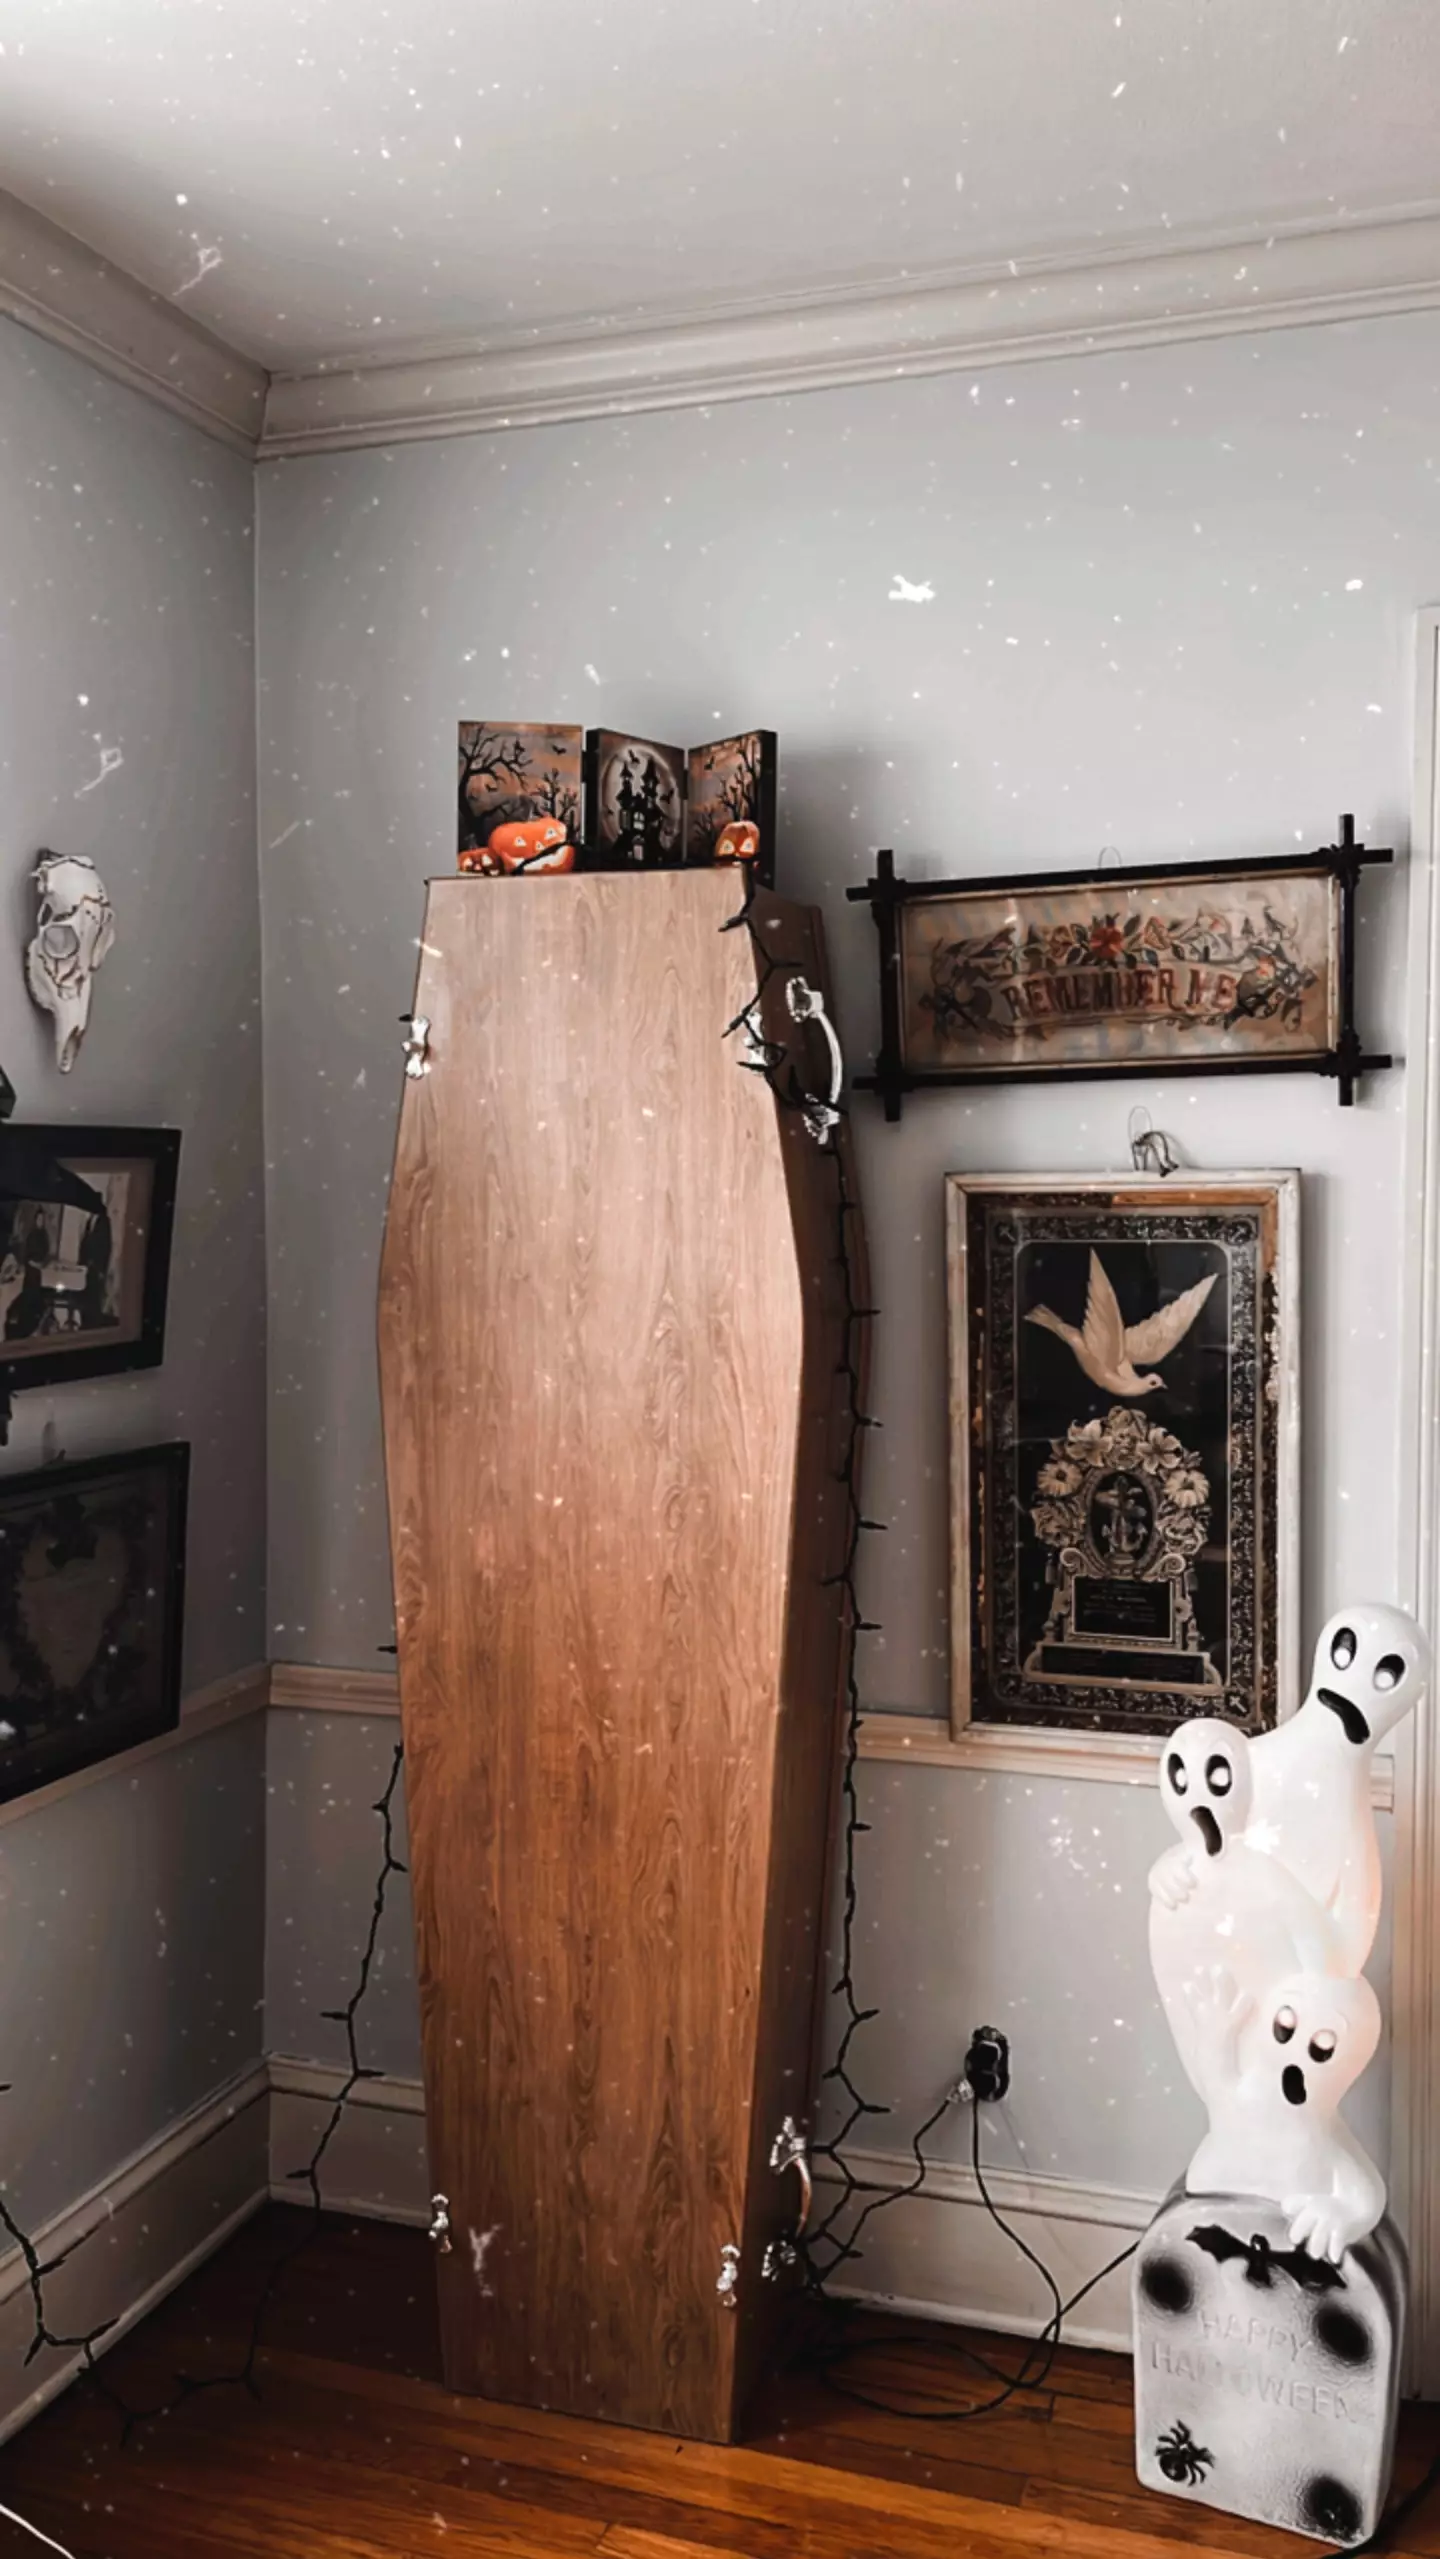 Coffins, ouija boards and human hair wreaths are some of the decor in Beckie-Ann's home.